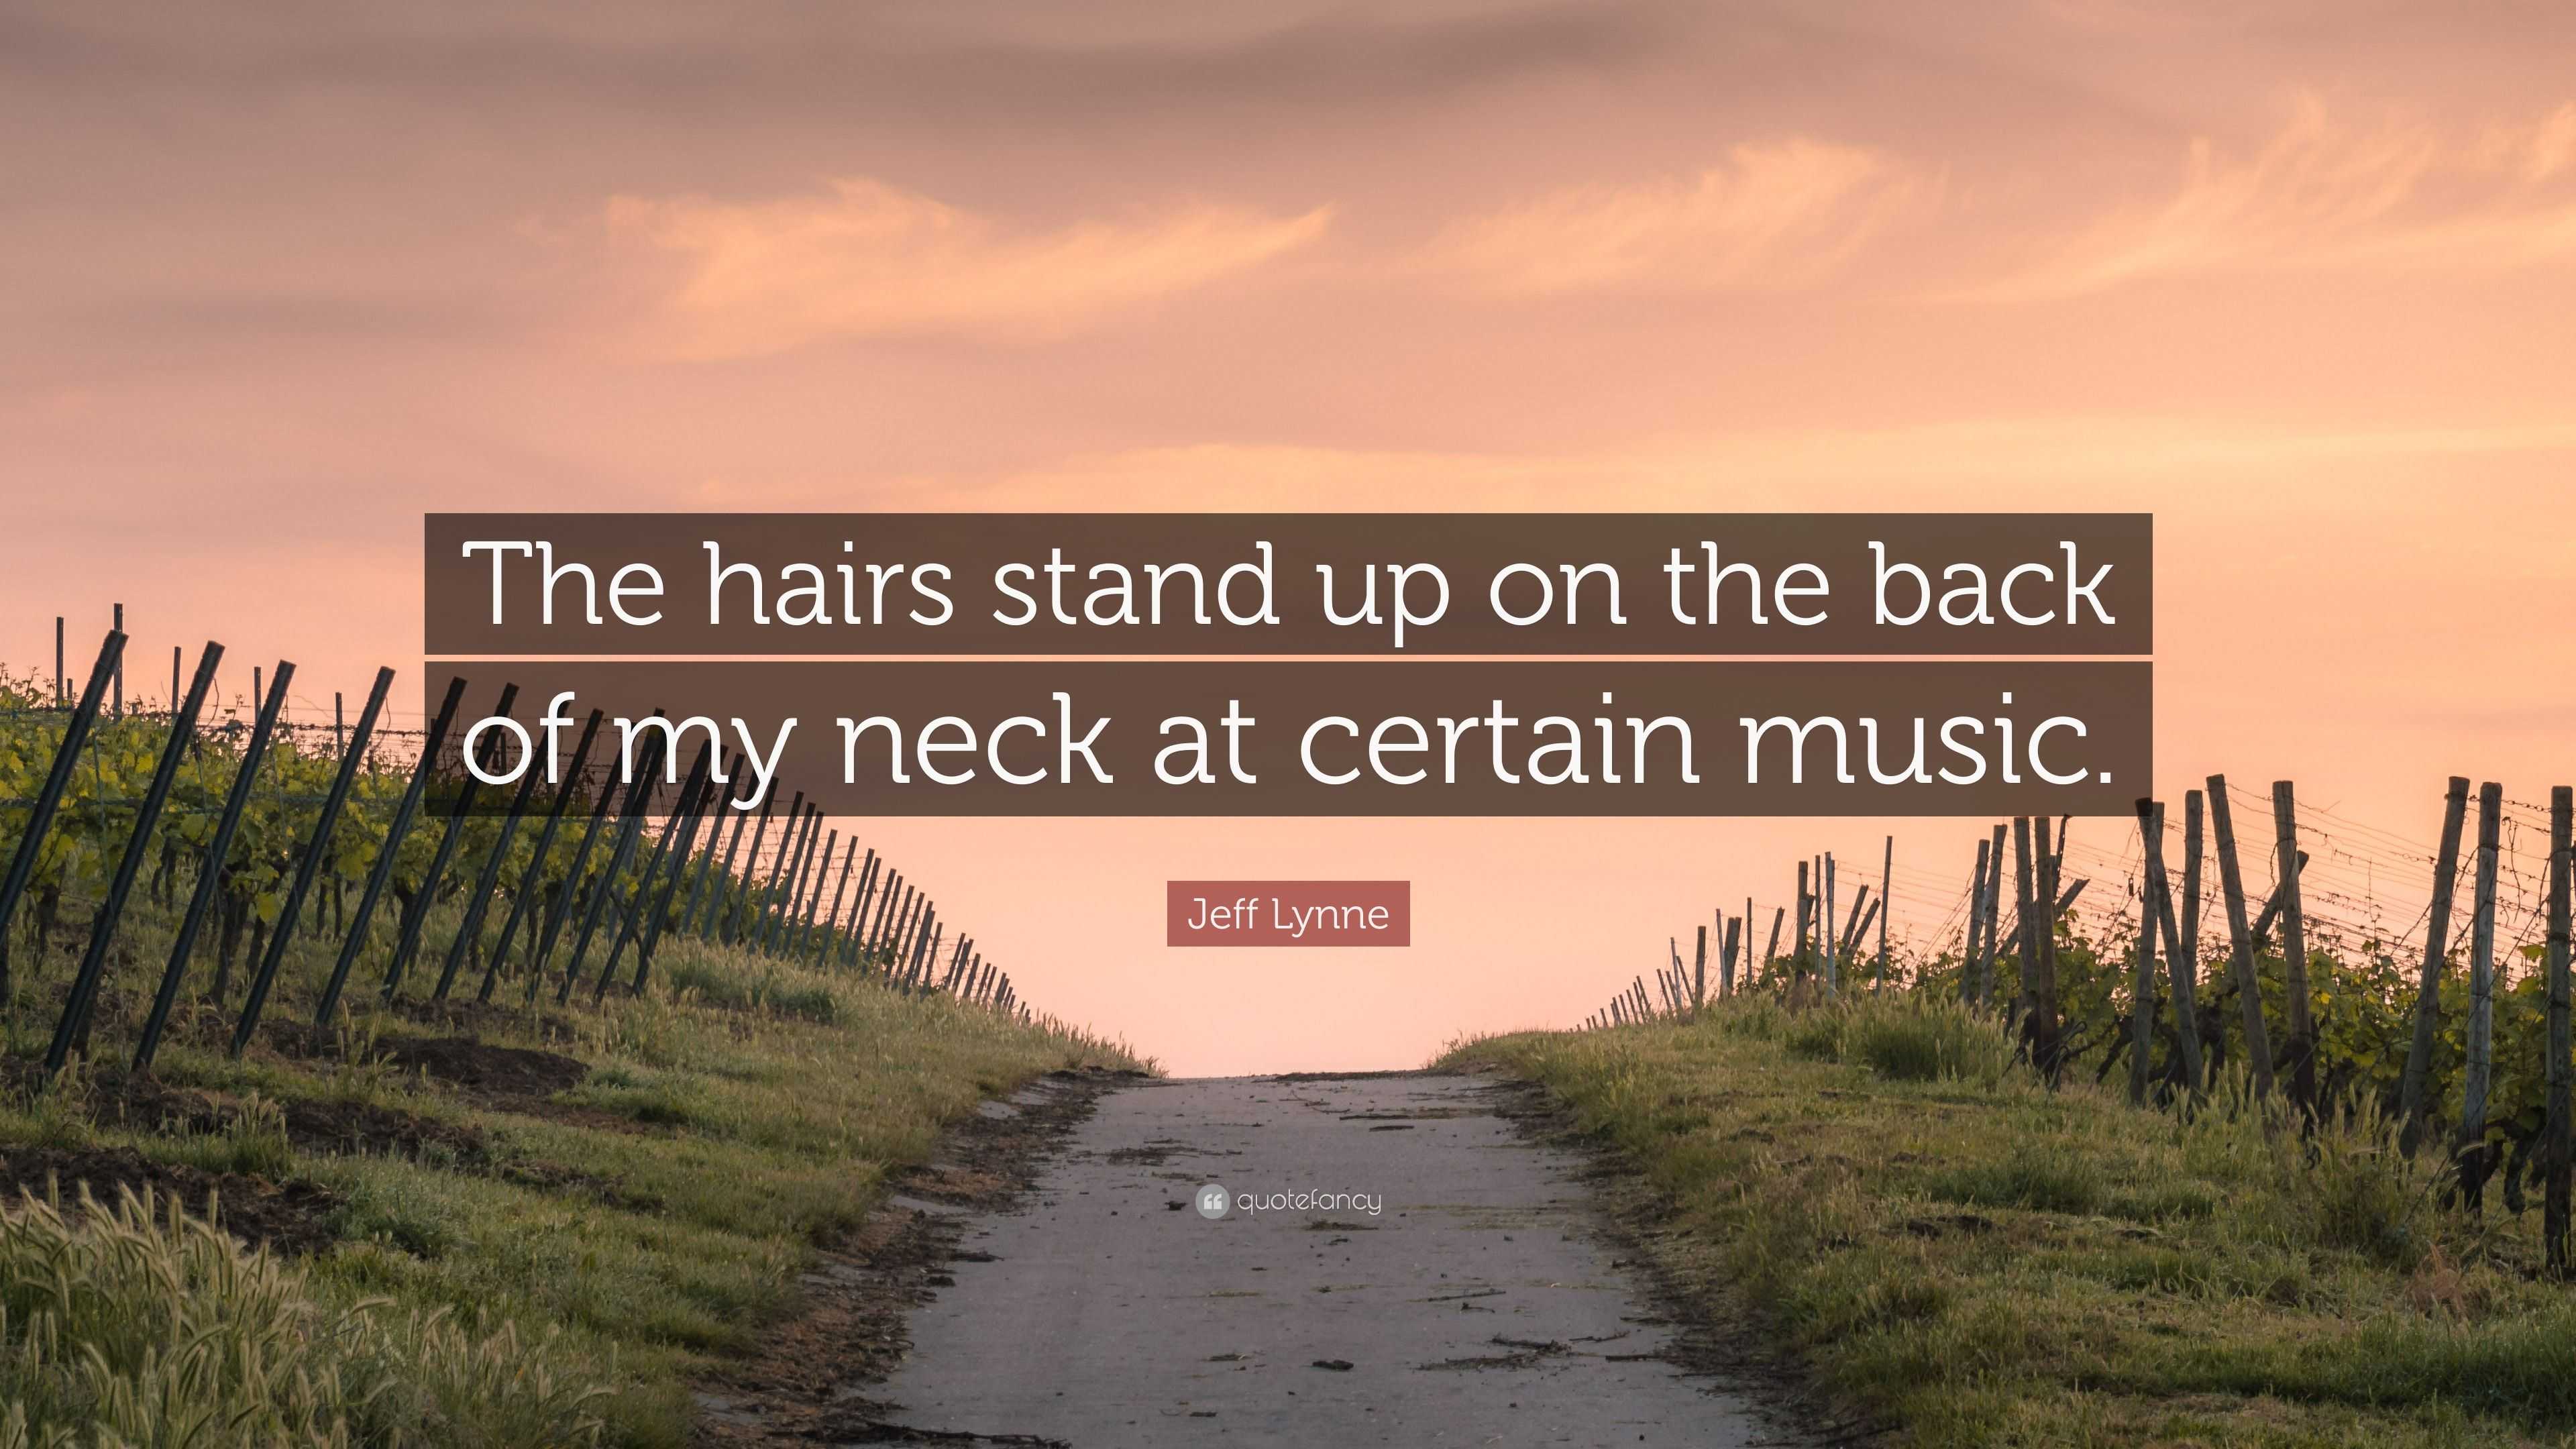 Jeff Lynne Quote: “The hairs stand up on the back of my neck at certain  music.”